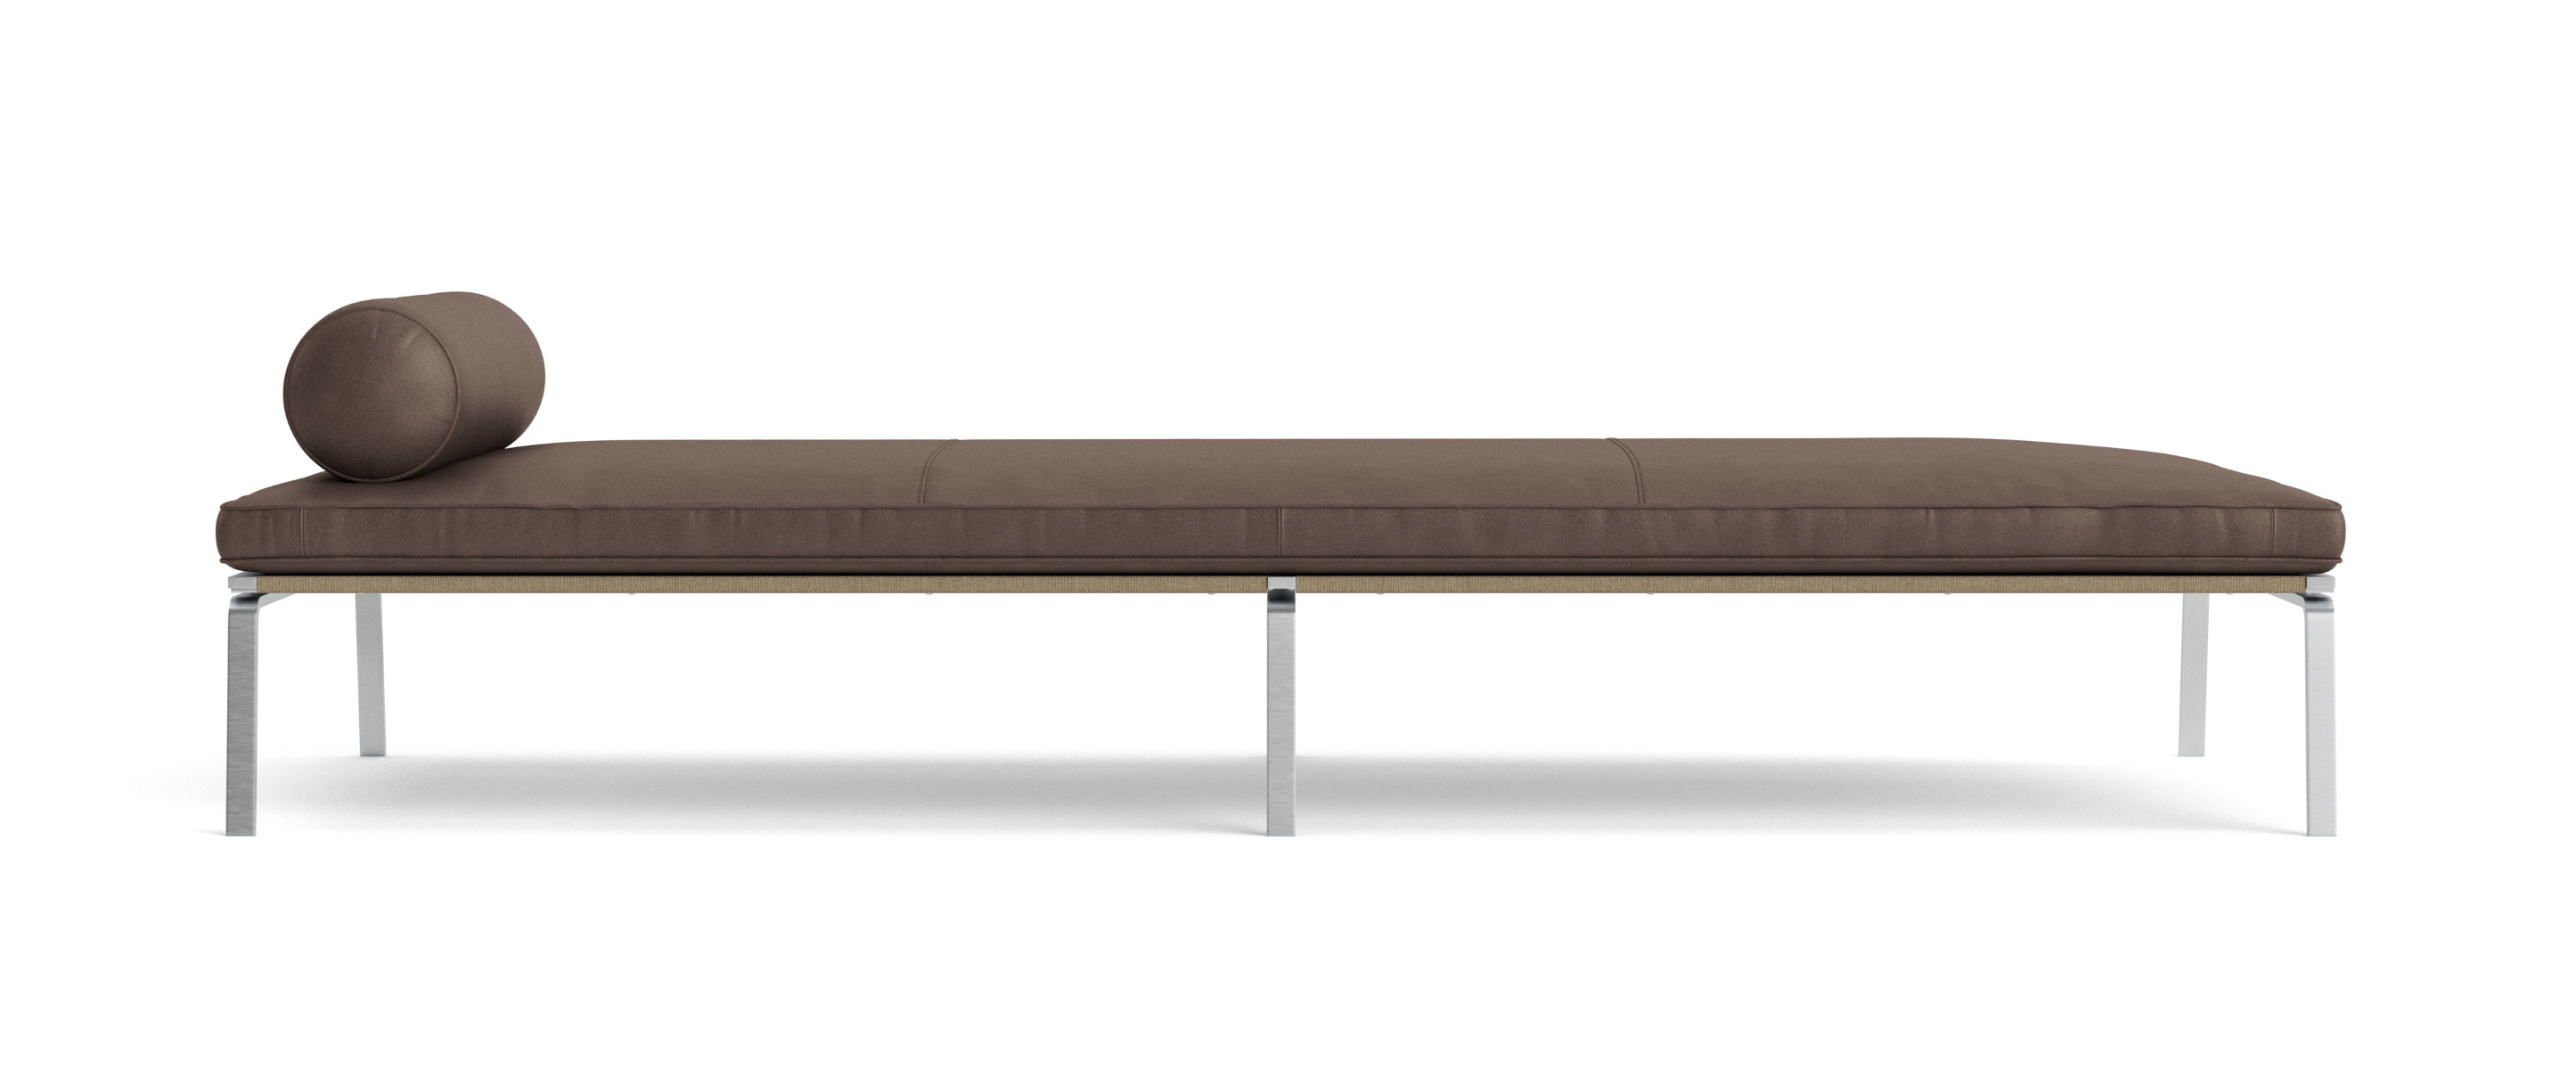 Man Daybed, dunes anthrazit 21003